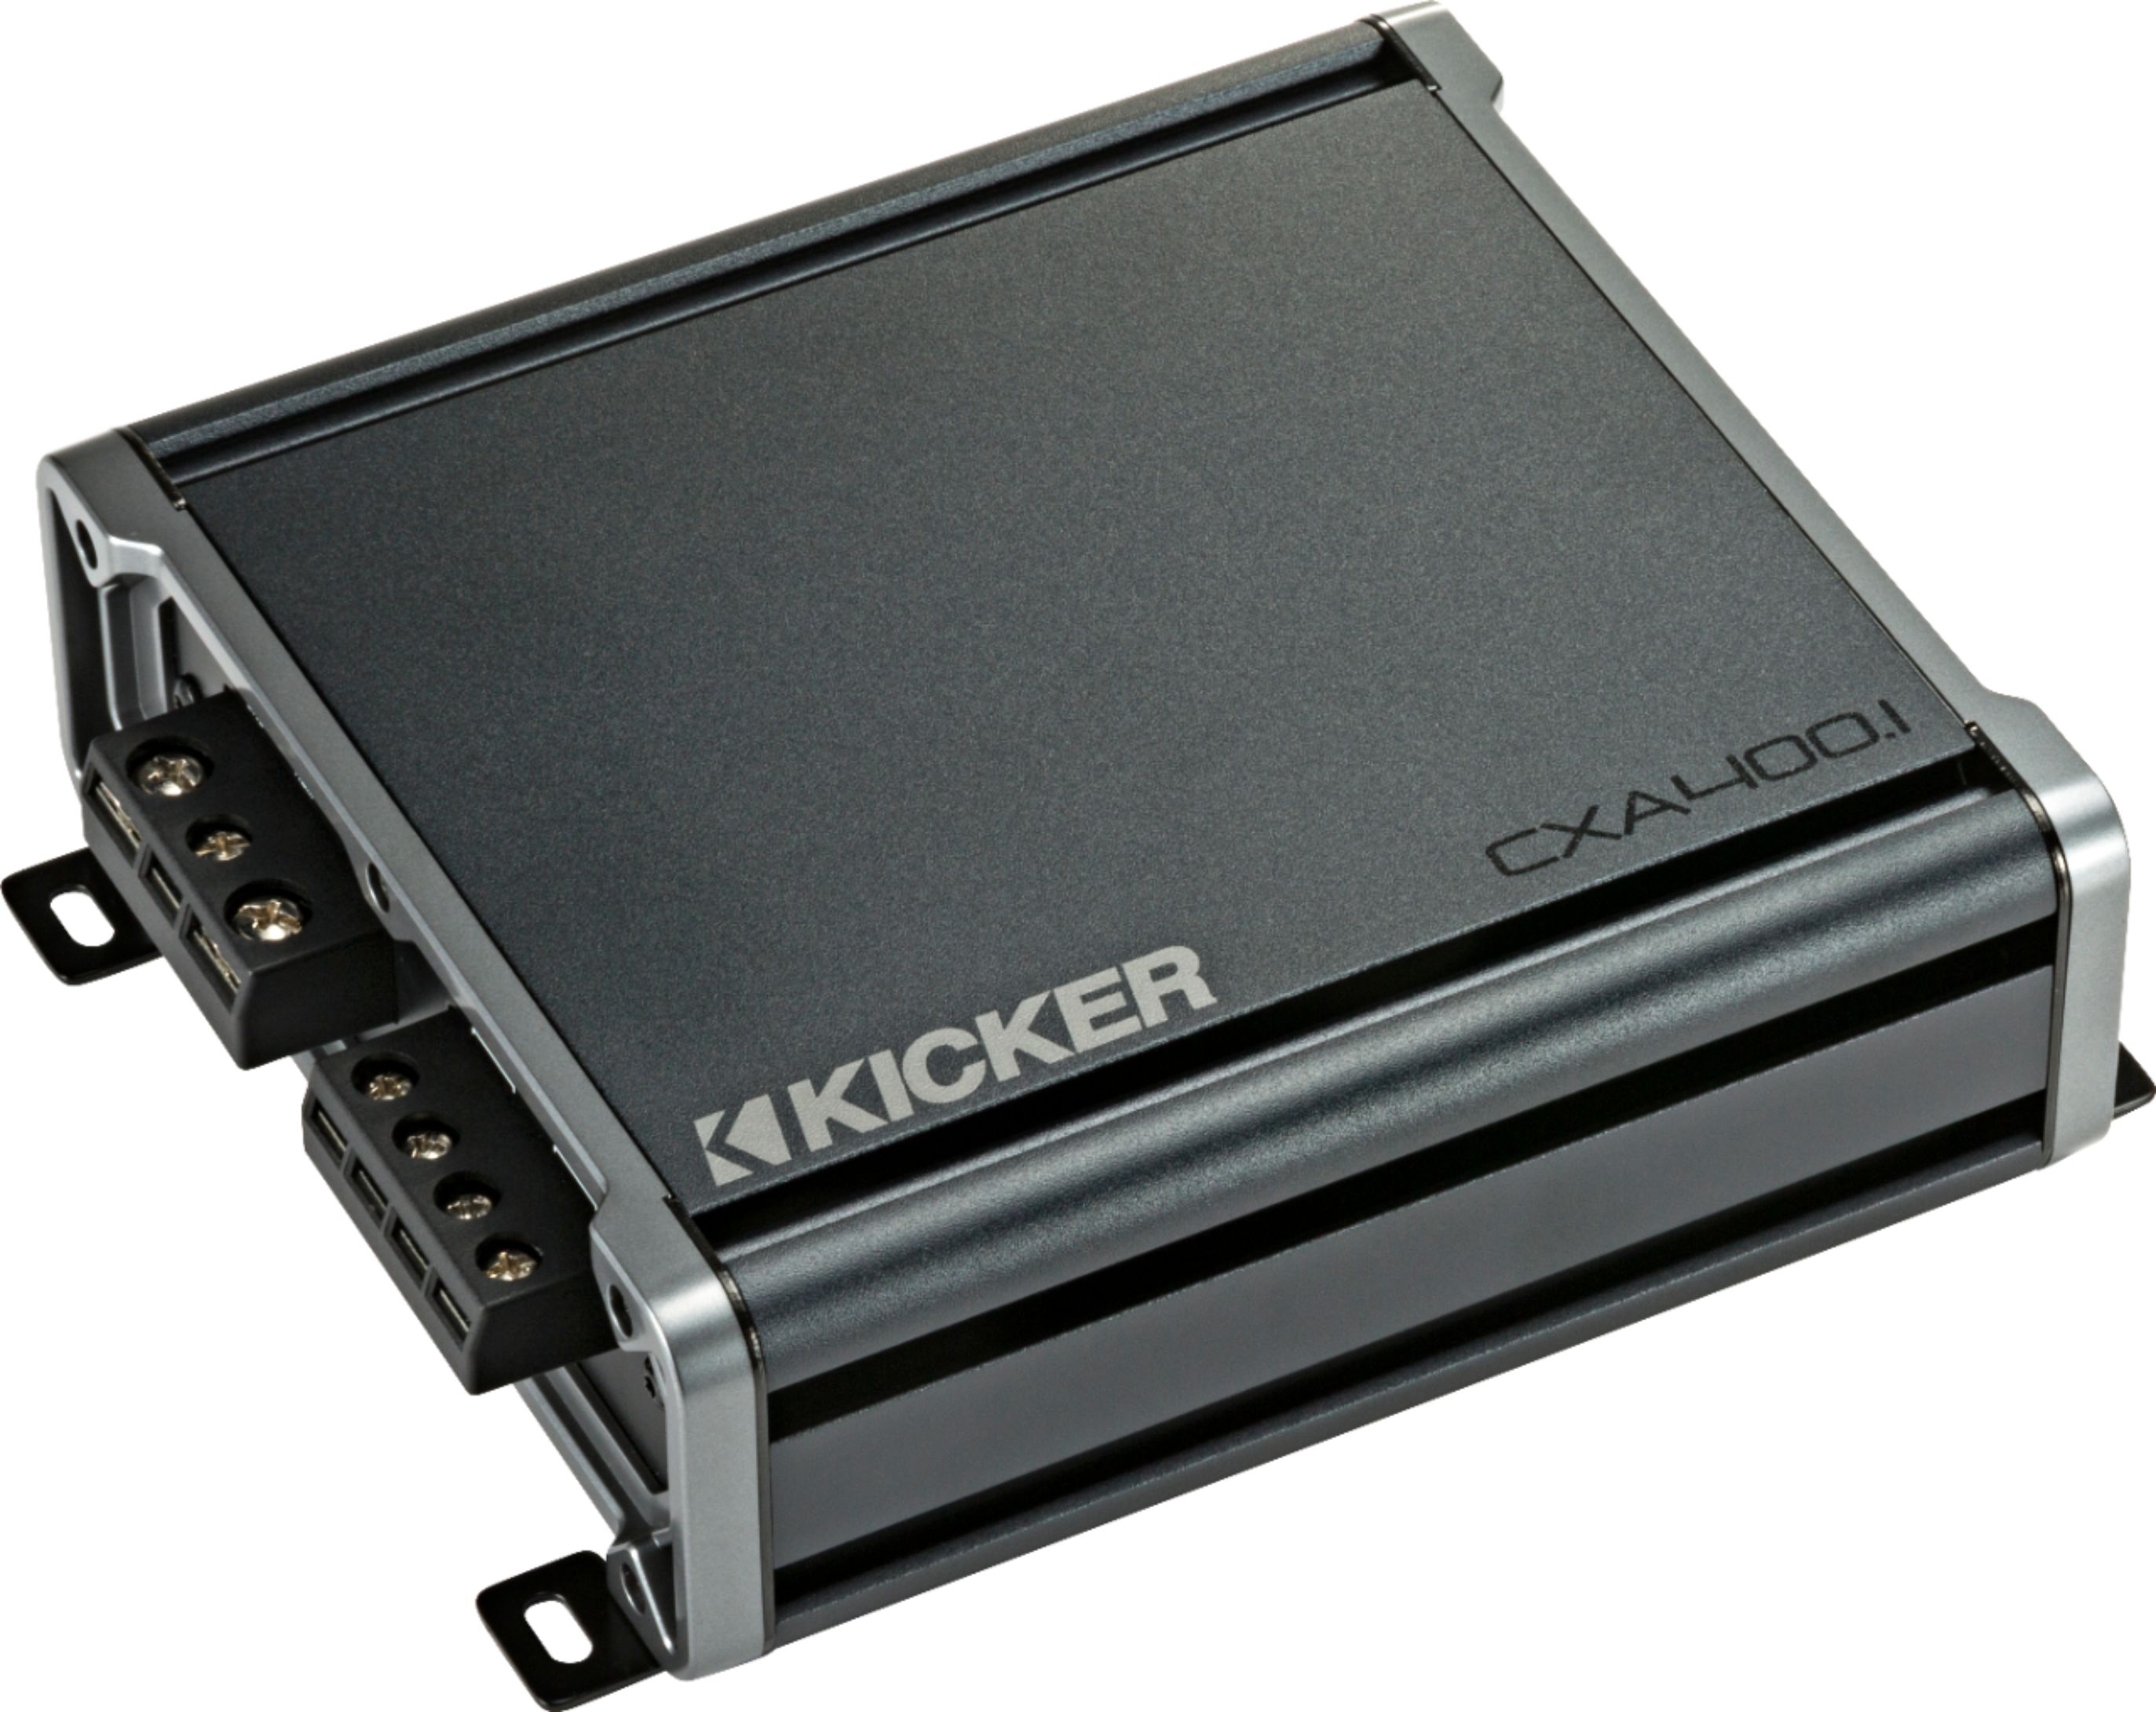 Angle View: KICKER - CX 400W Class D Digital Mono Amplifier with Variable Low-Pass Crossover - Black